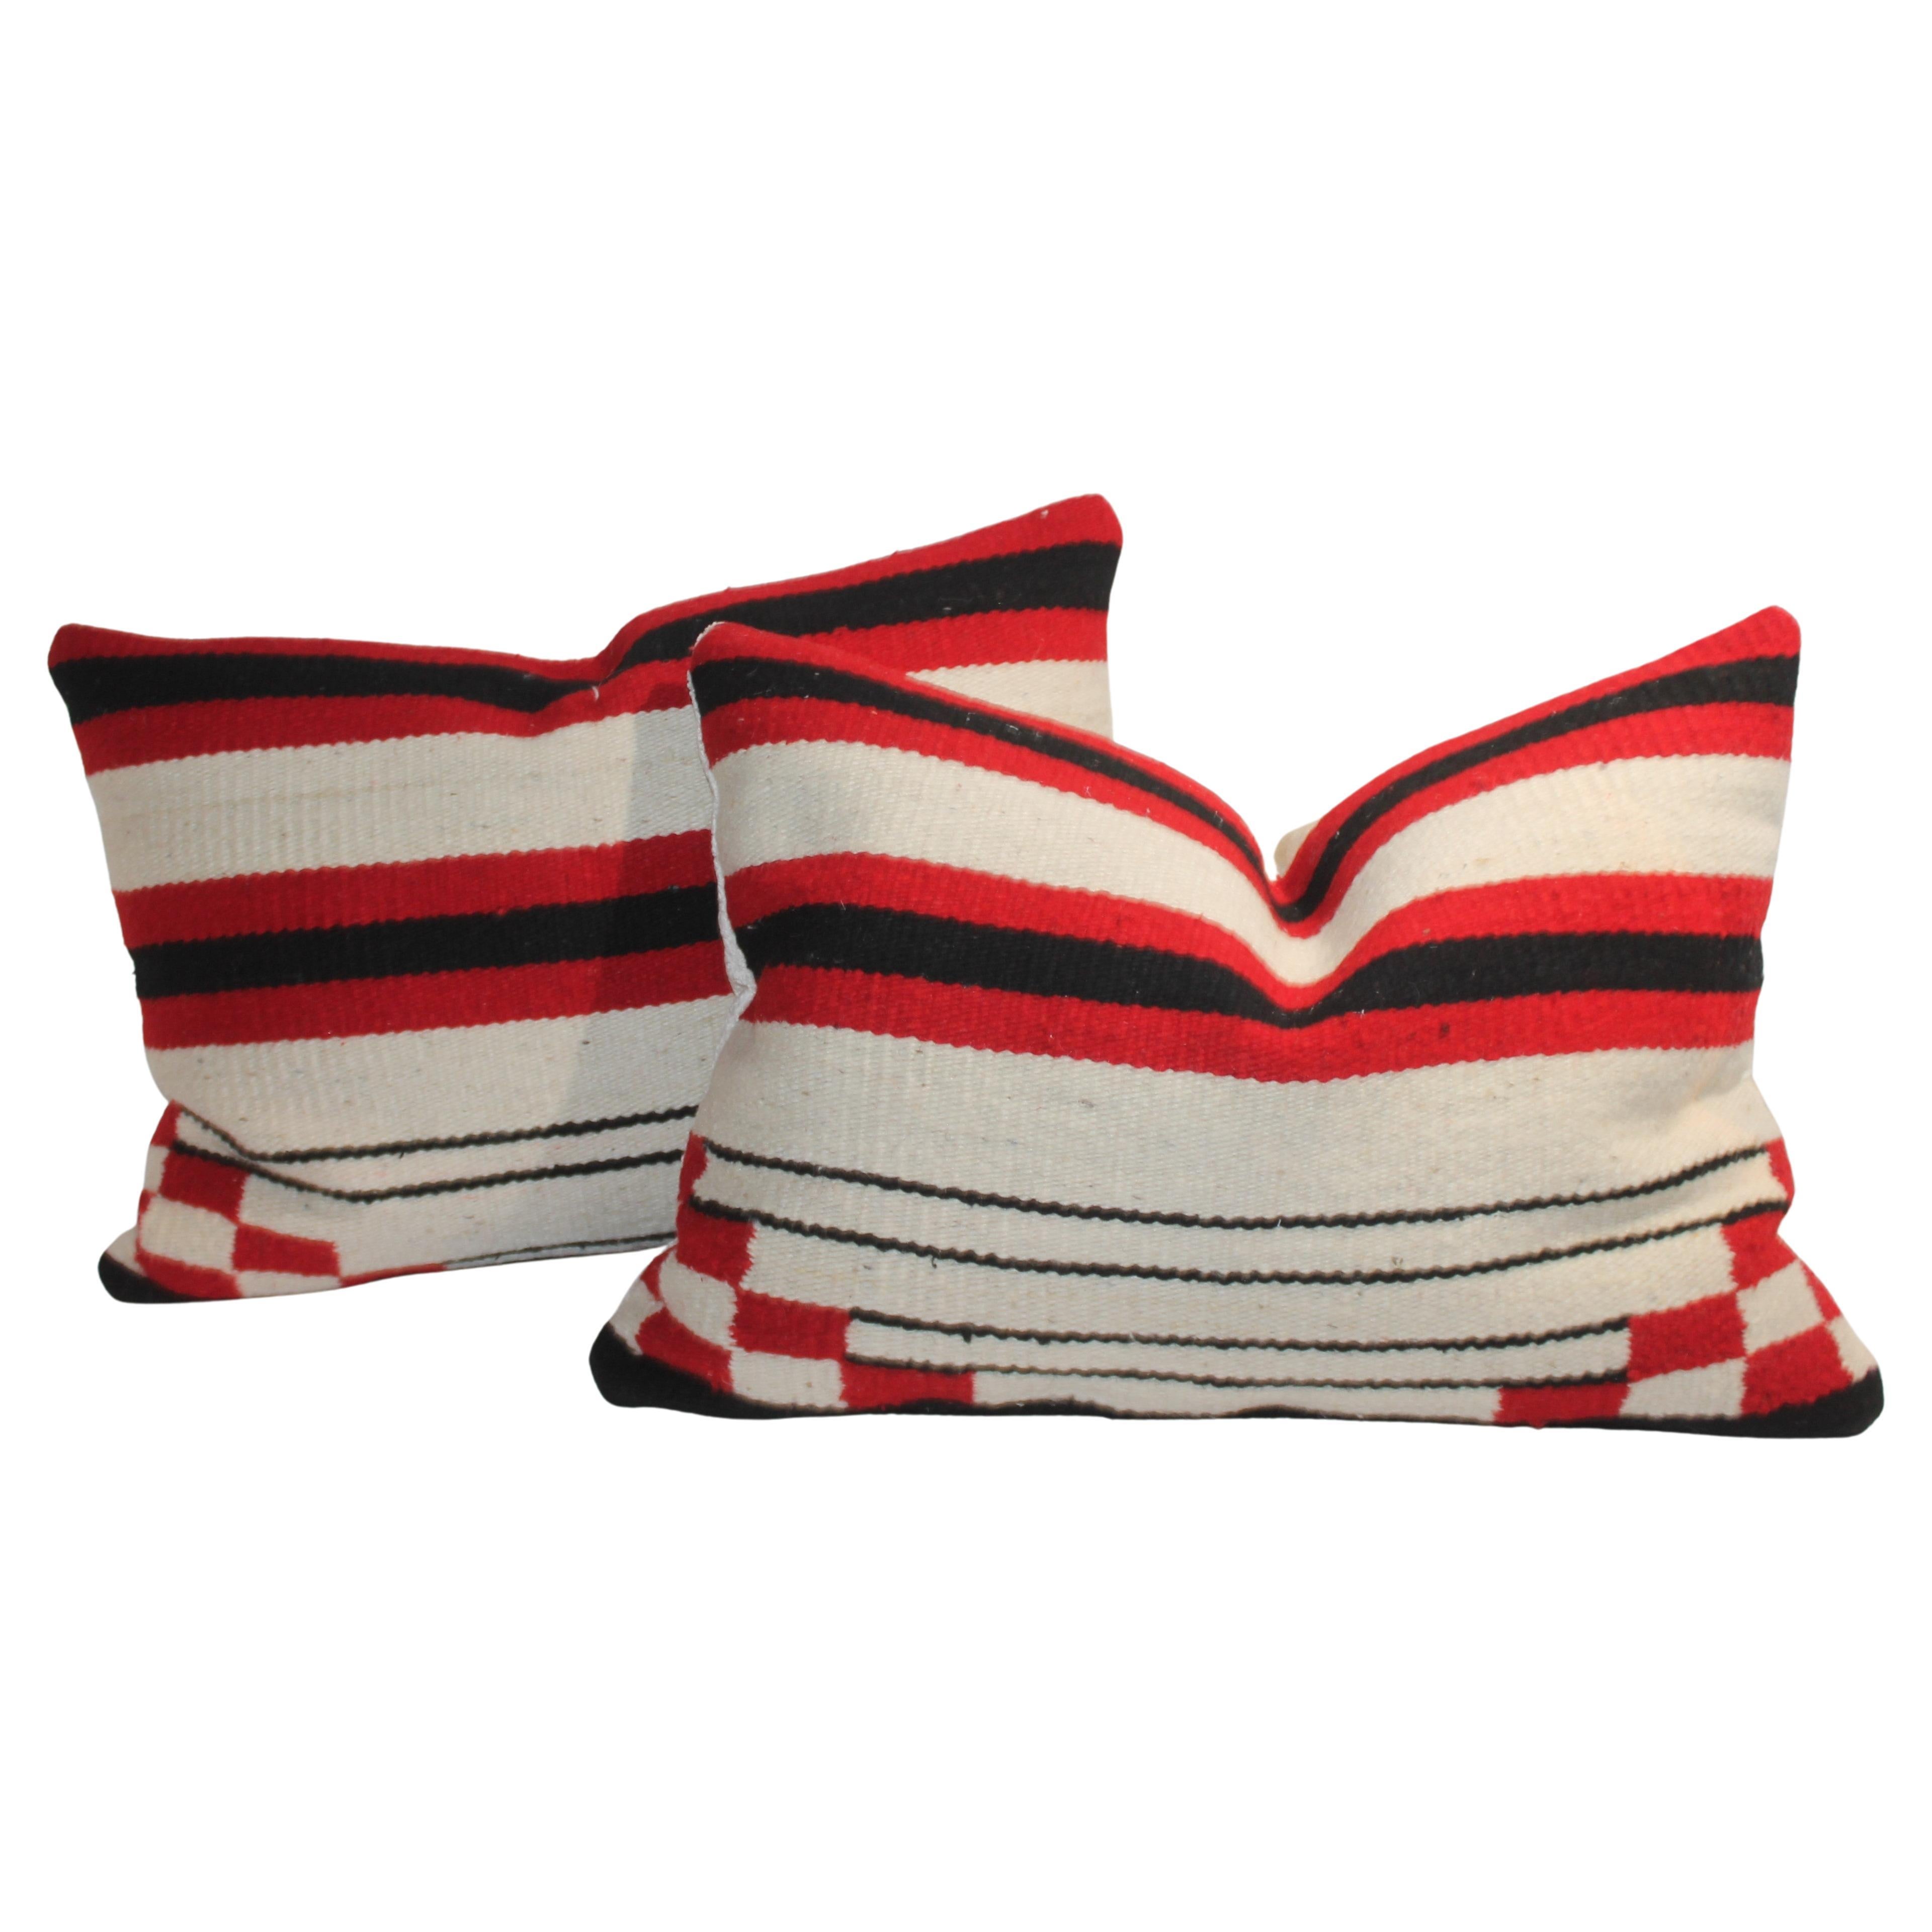 Pair of Striped Navajo Weaving Pillows with Checker Corner Pattern